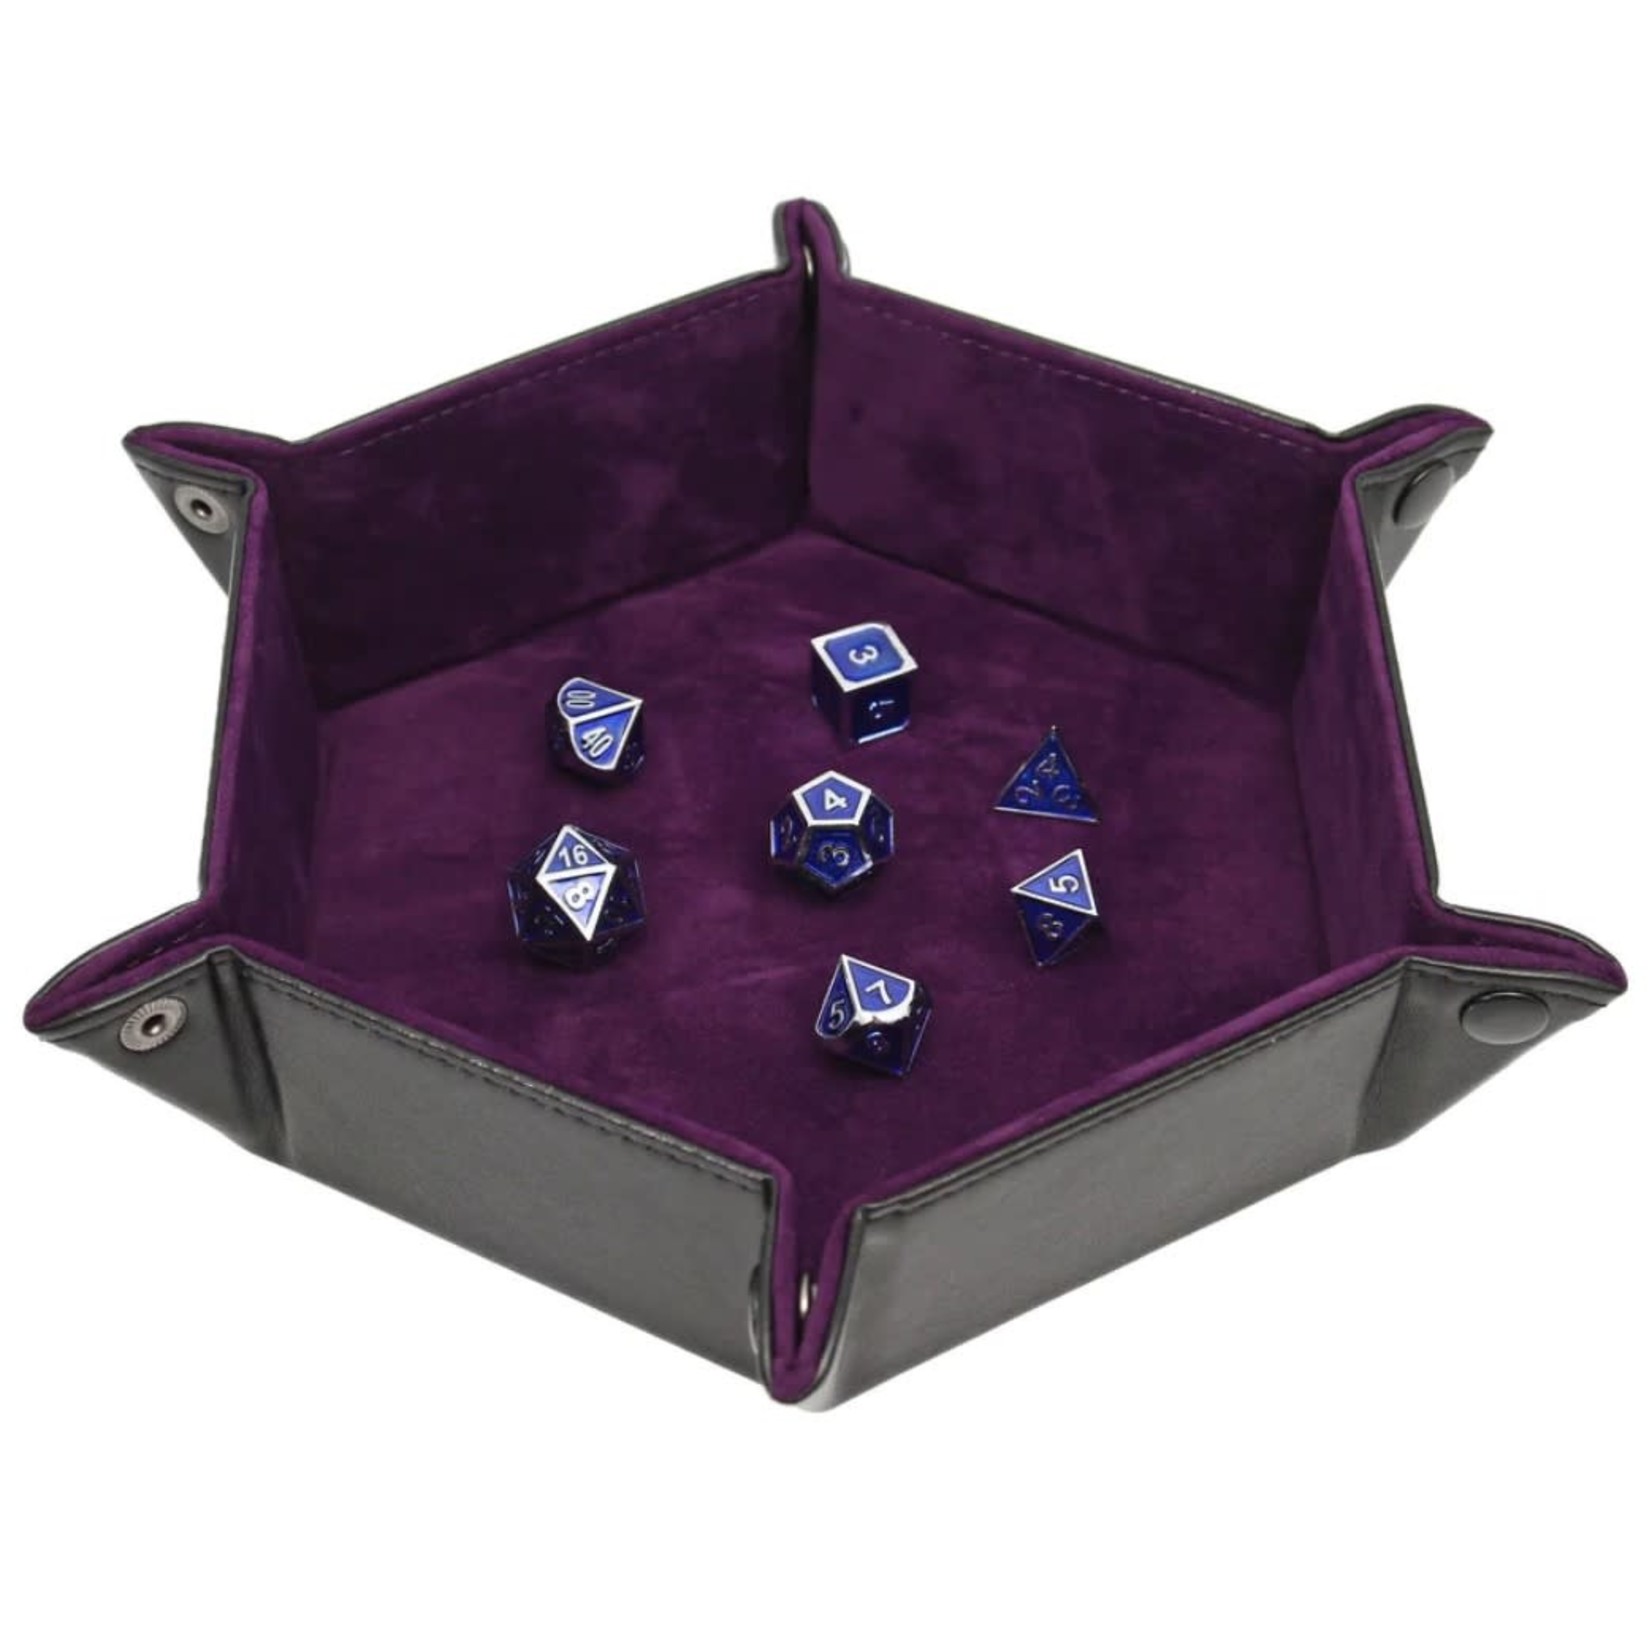 Forged Gaming Hexagon Snap Folding Dice Tray